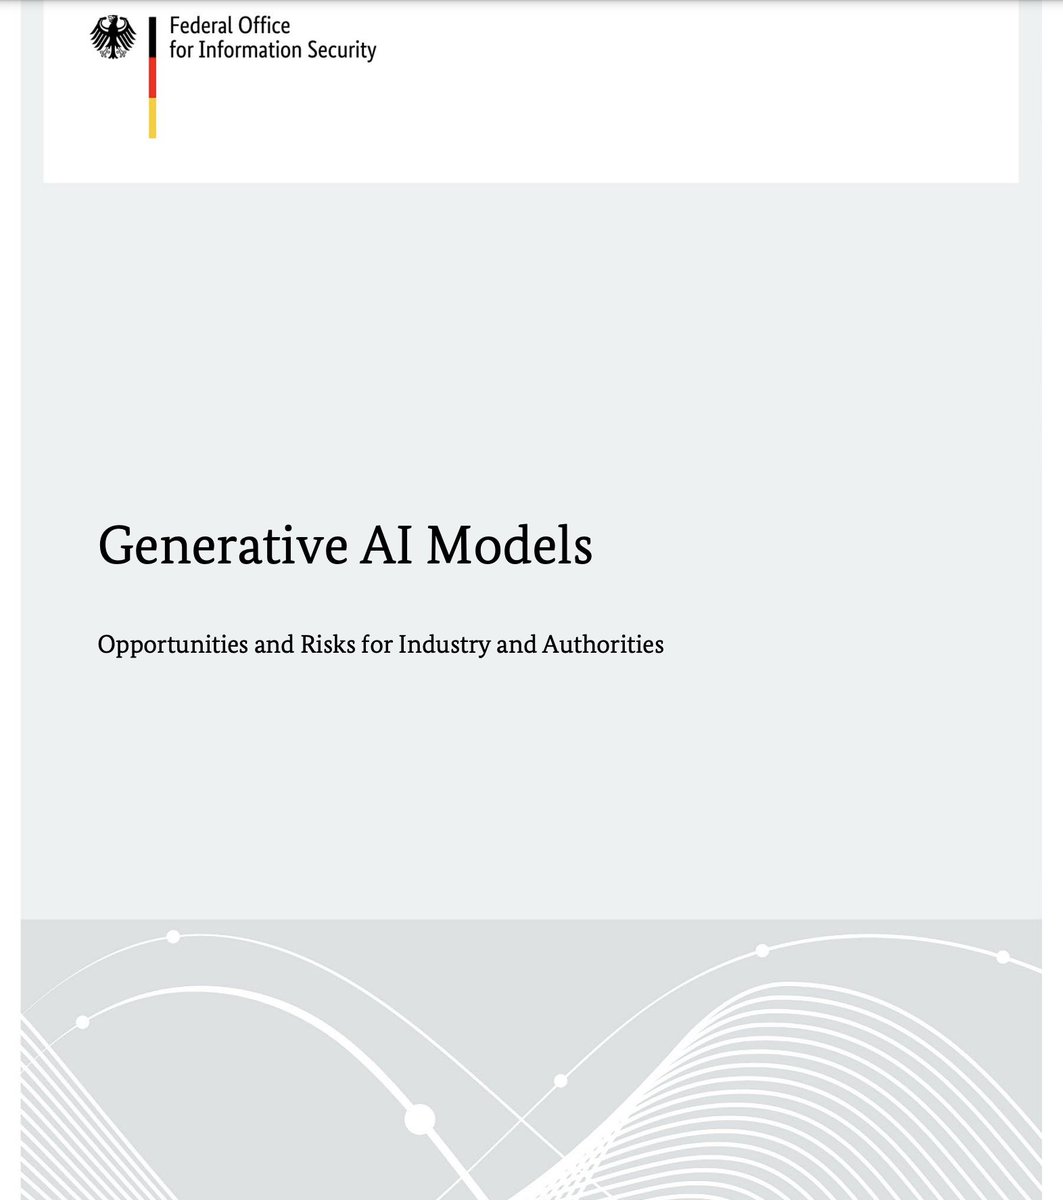 🚨 AI Policy Alert: The German Federal Office for Information Security publishes the report 'Generative AI Models - Opportunities and Risks for Industry and Authorities.' Quotes & comments: 'LLMs are trained based on huge text corpora. The origin of these texts and their quality